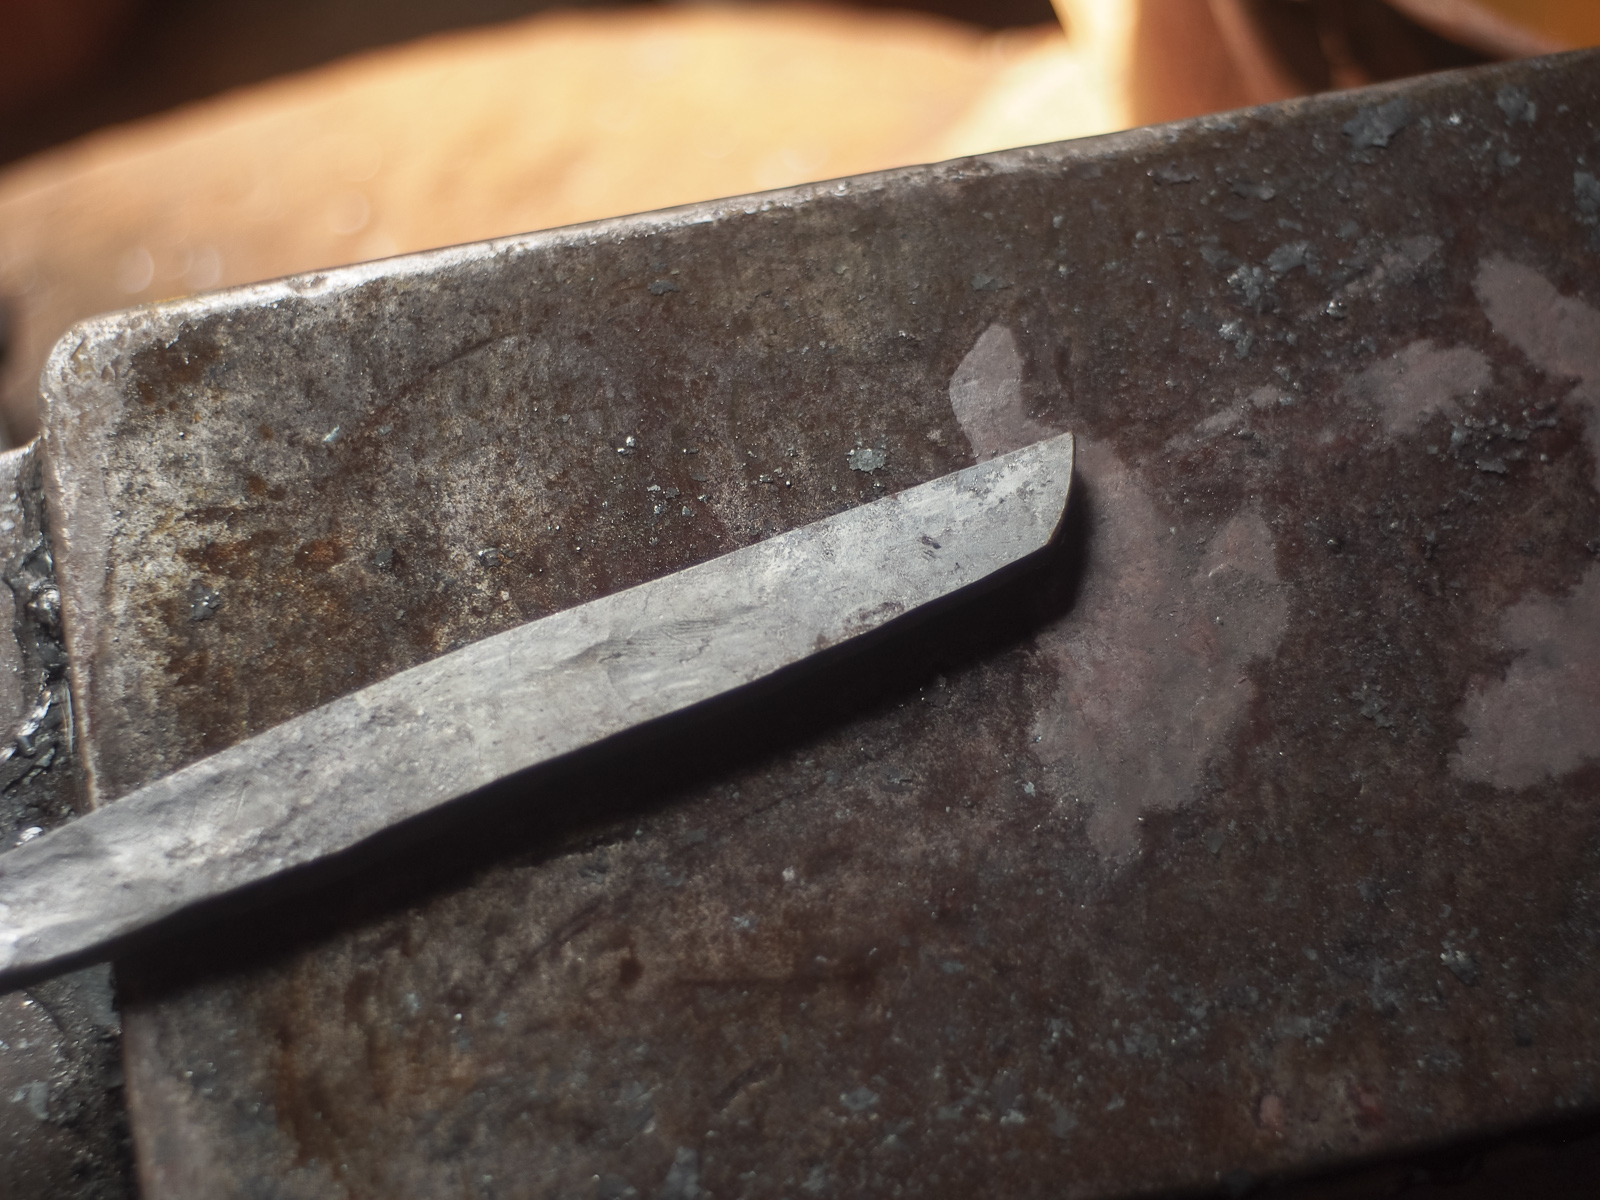 Island Blacksmith: Hand forged knives from reclaimed shear steel.